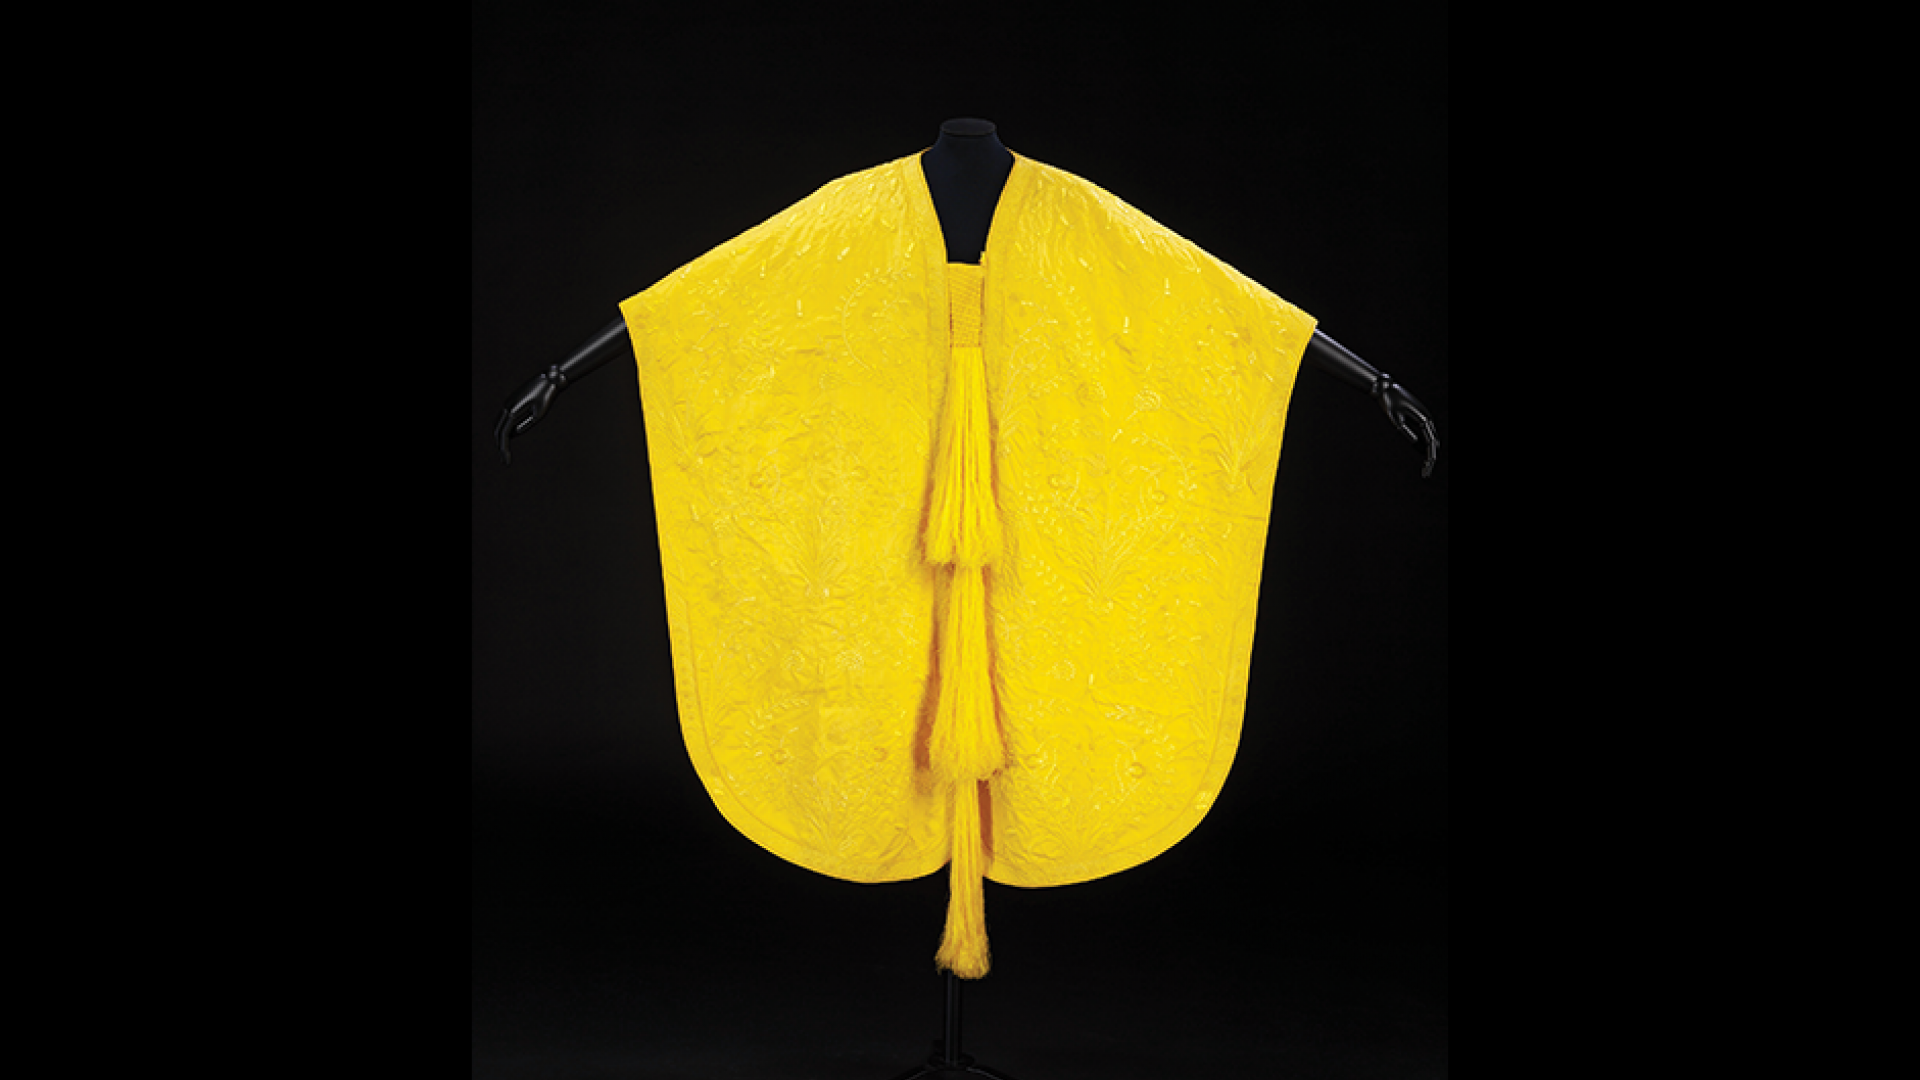 Image of the cape made from golden orb spider silk